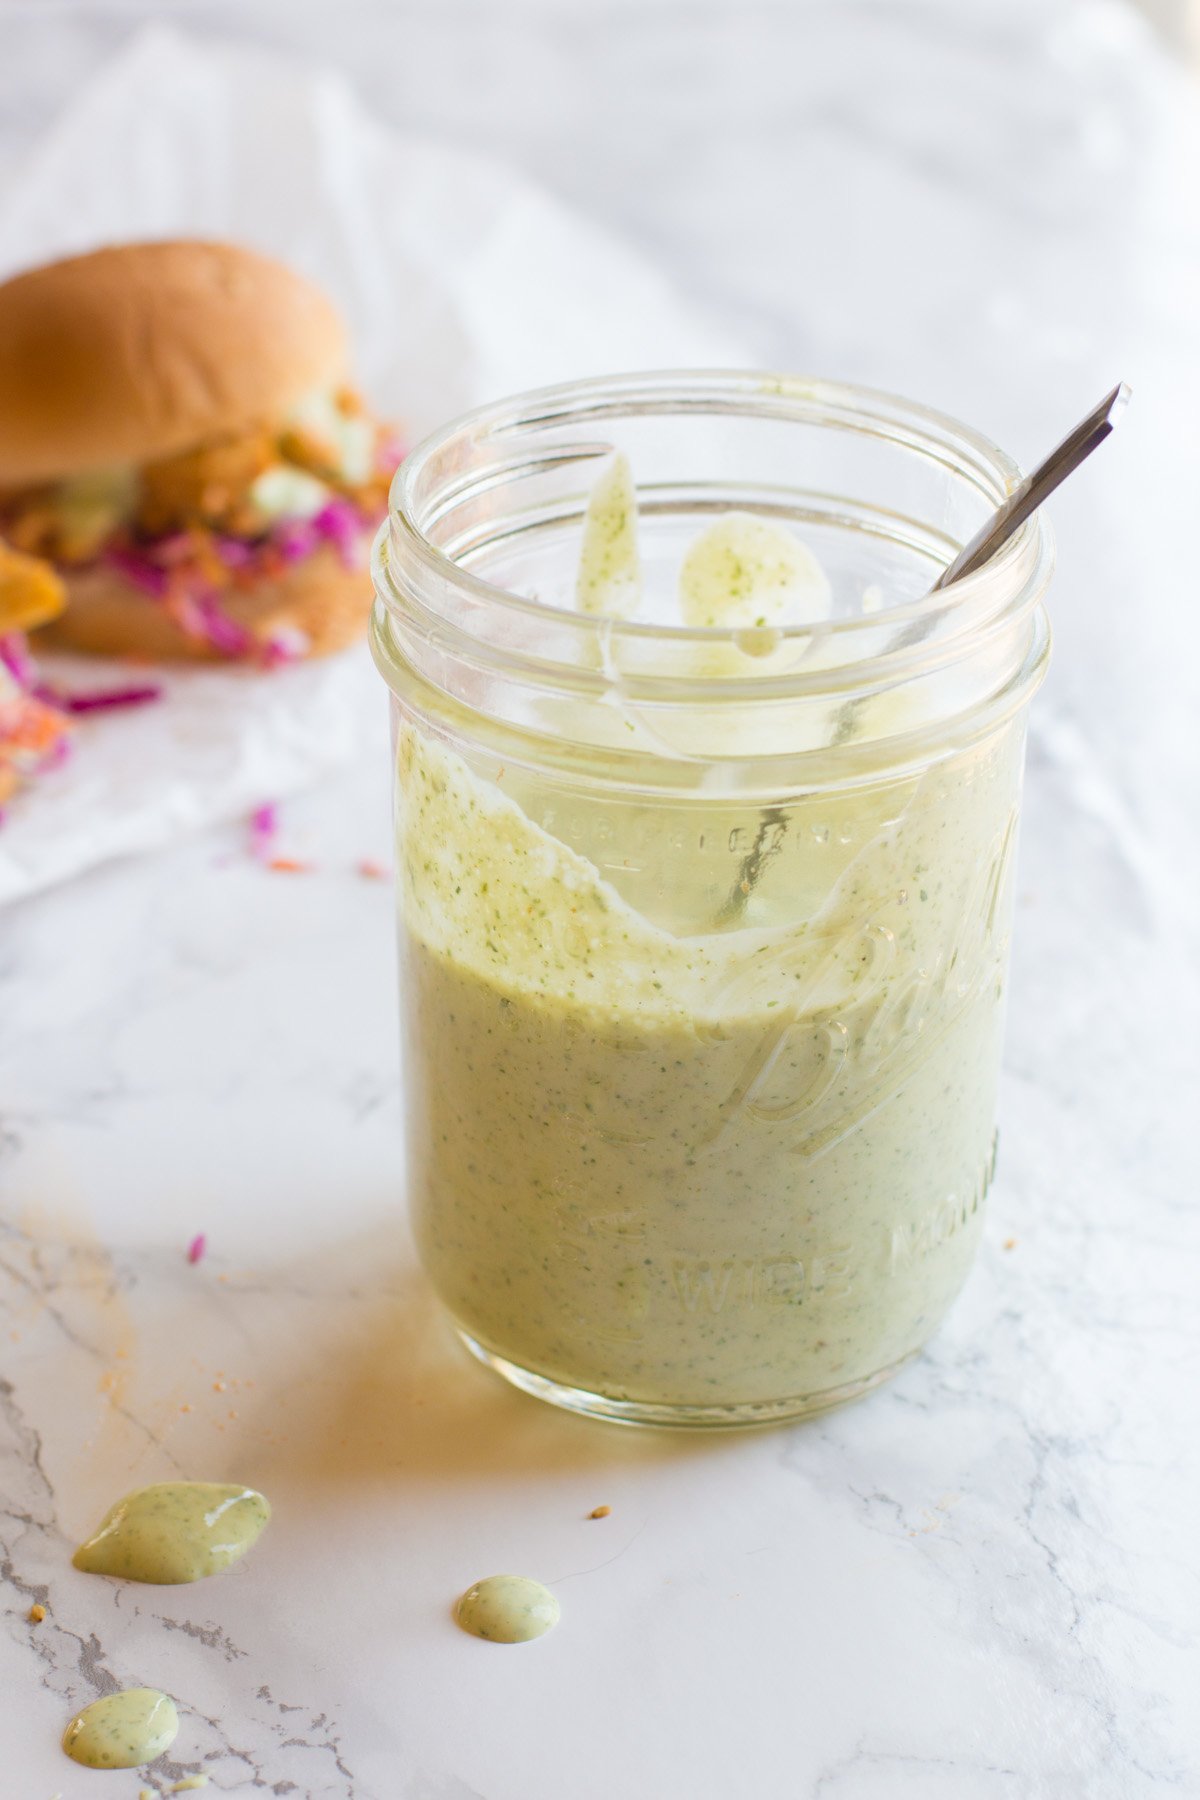 A spoon rests inside a mason jar filled with homemade ranch sauce.